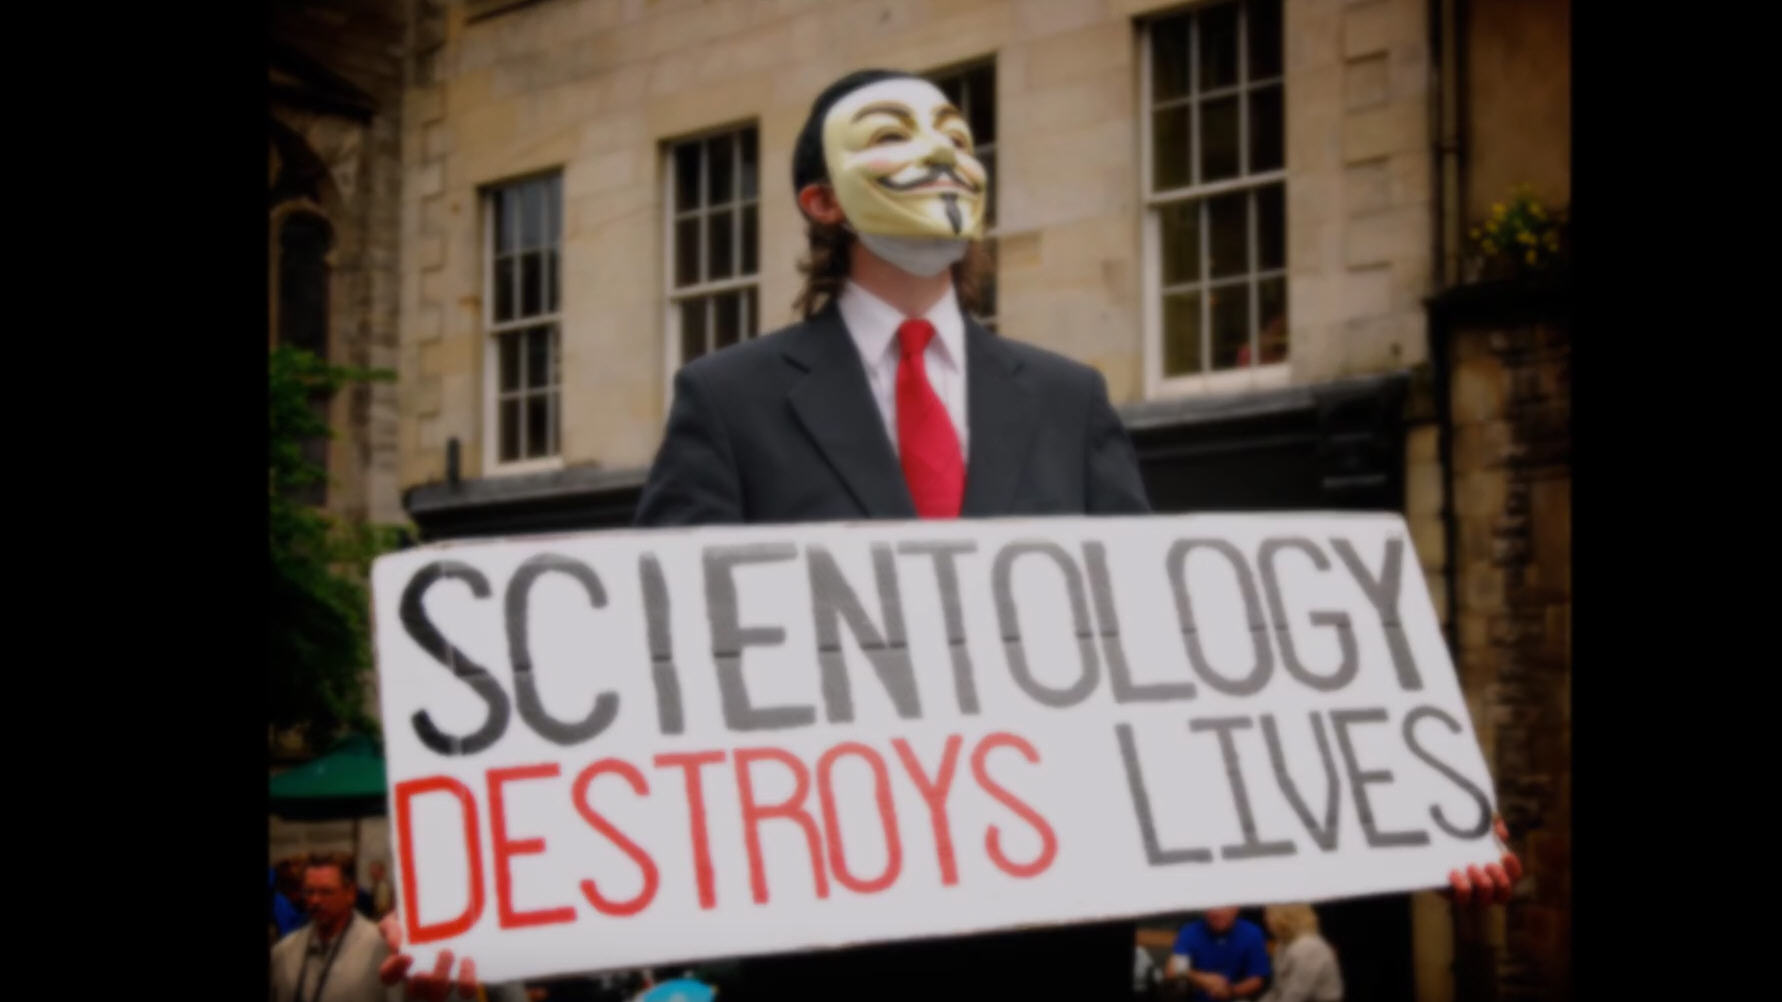 From battling Scientology to taking down Islamic State, hacker ...